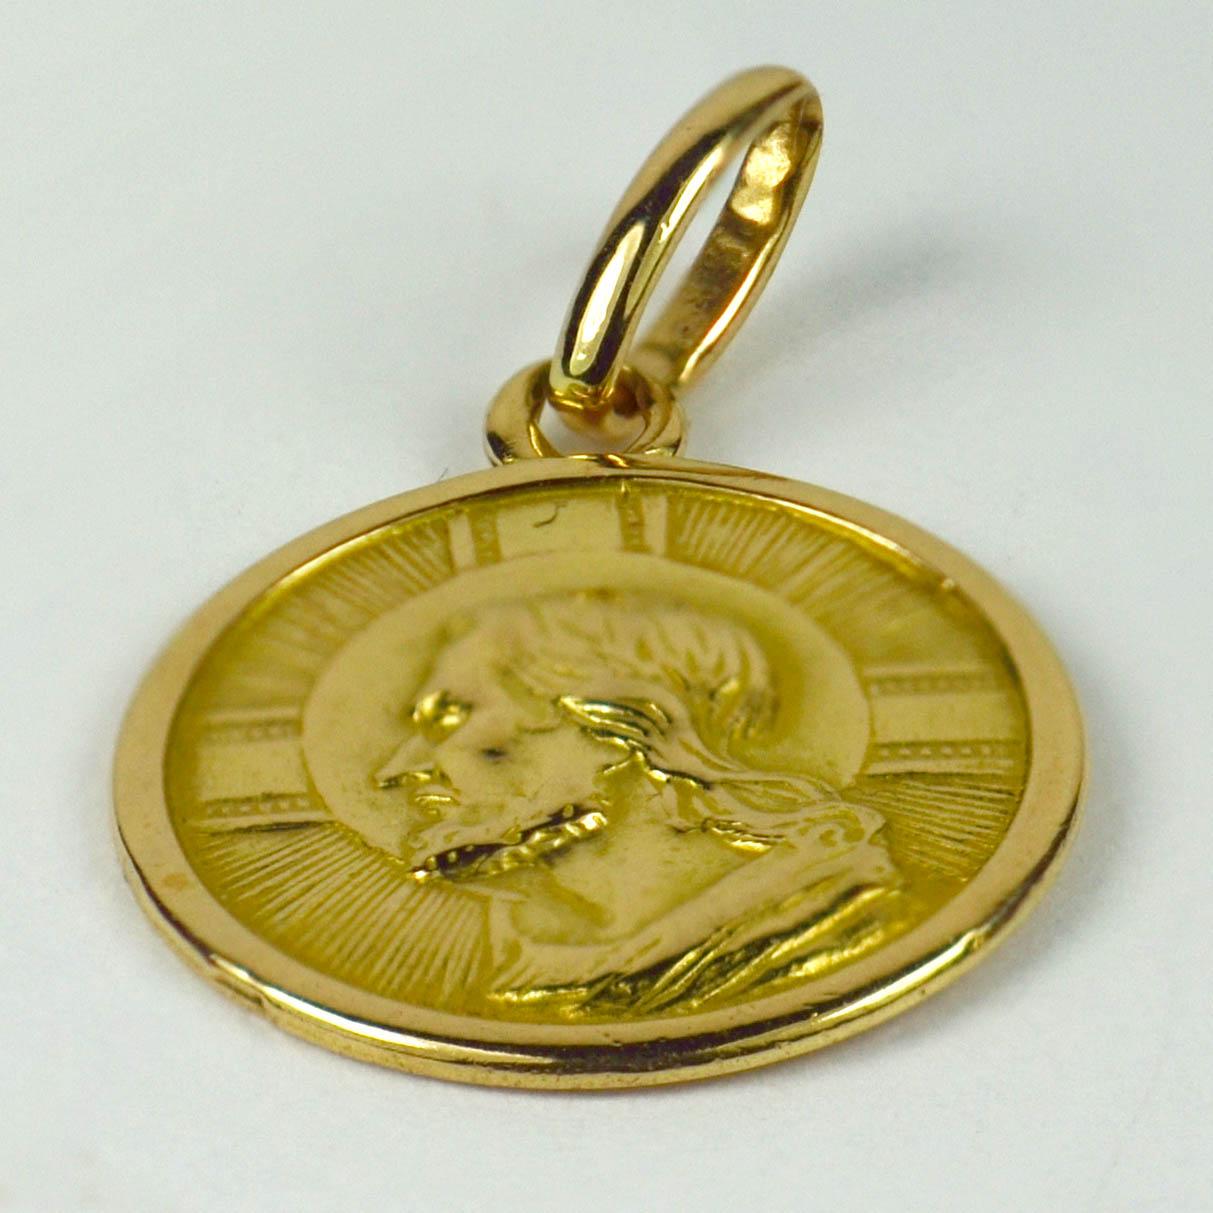 An Italian 18 karat yellow gold charm pendant depicting the head of Jesus on one side and a cross and anchor (indicating faith and hope) with the words 